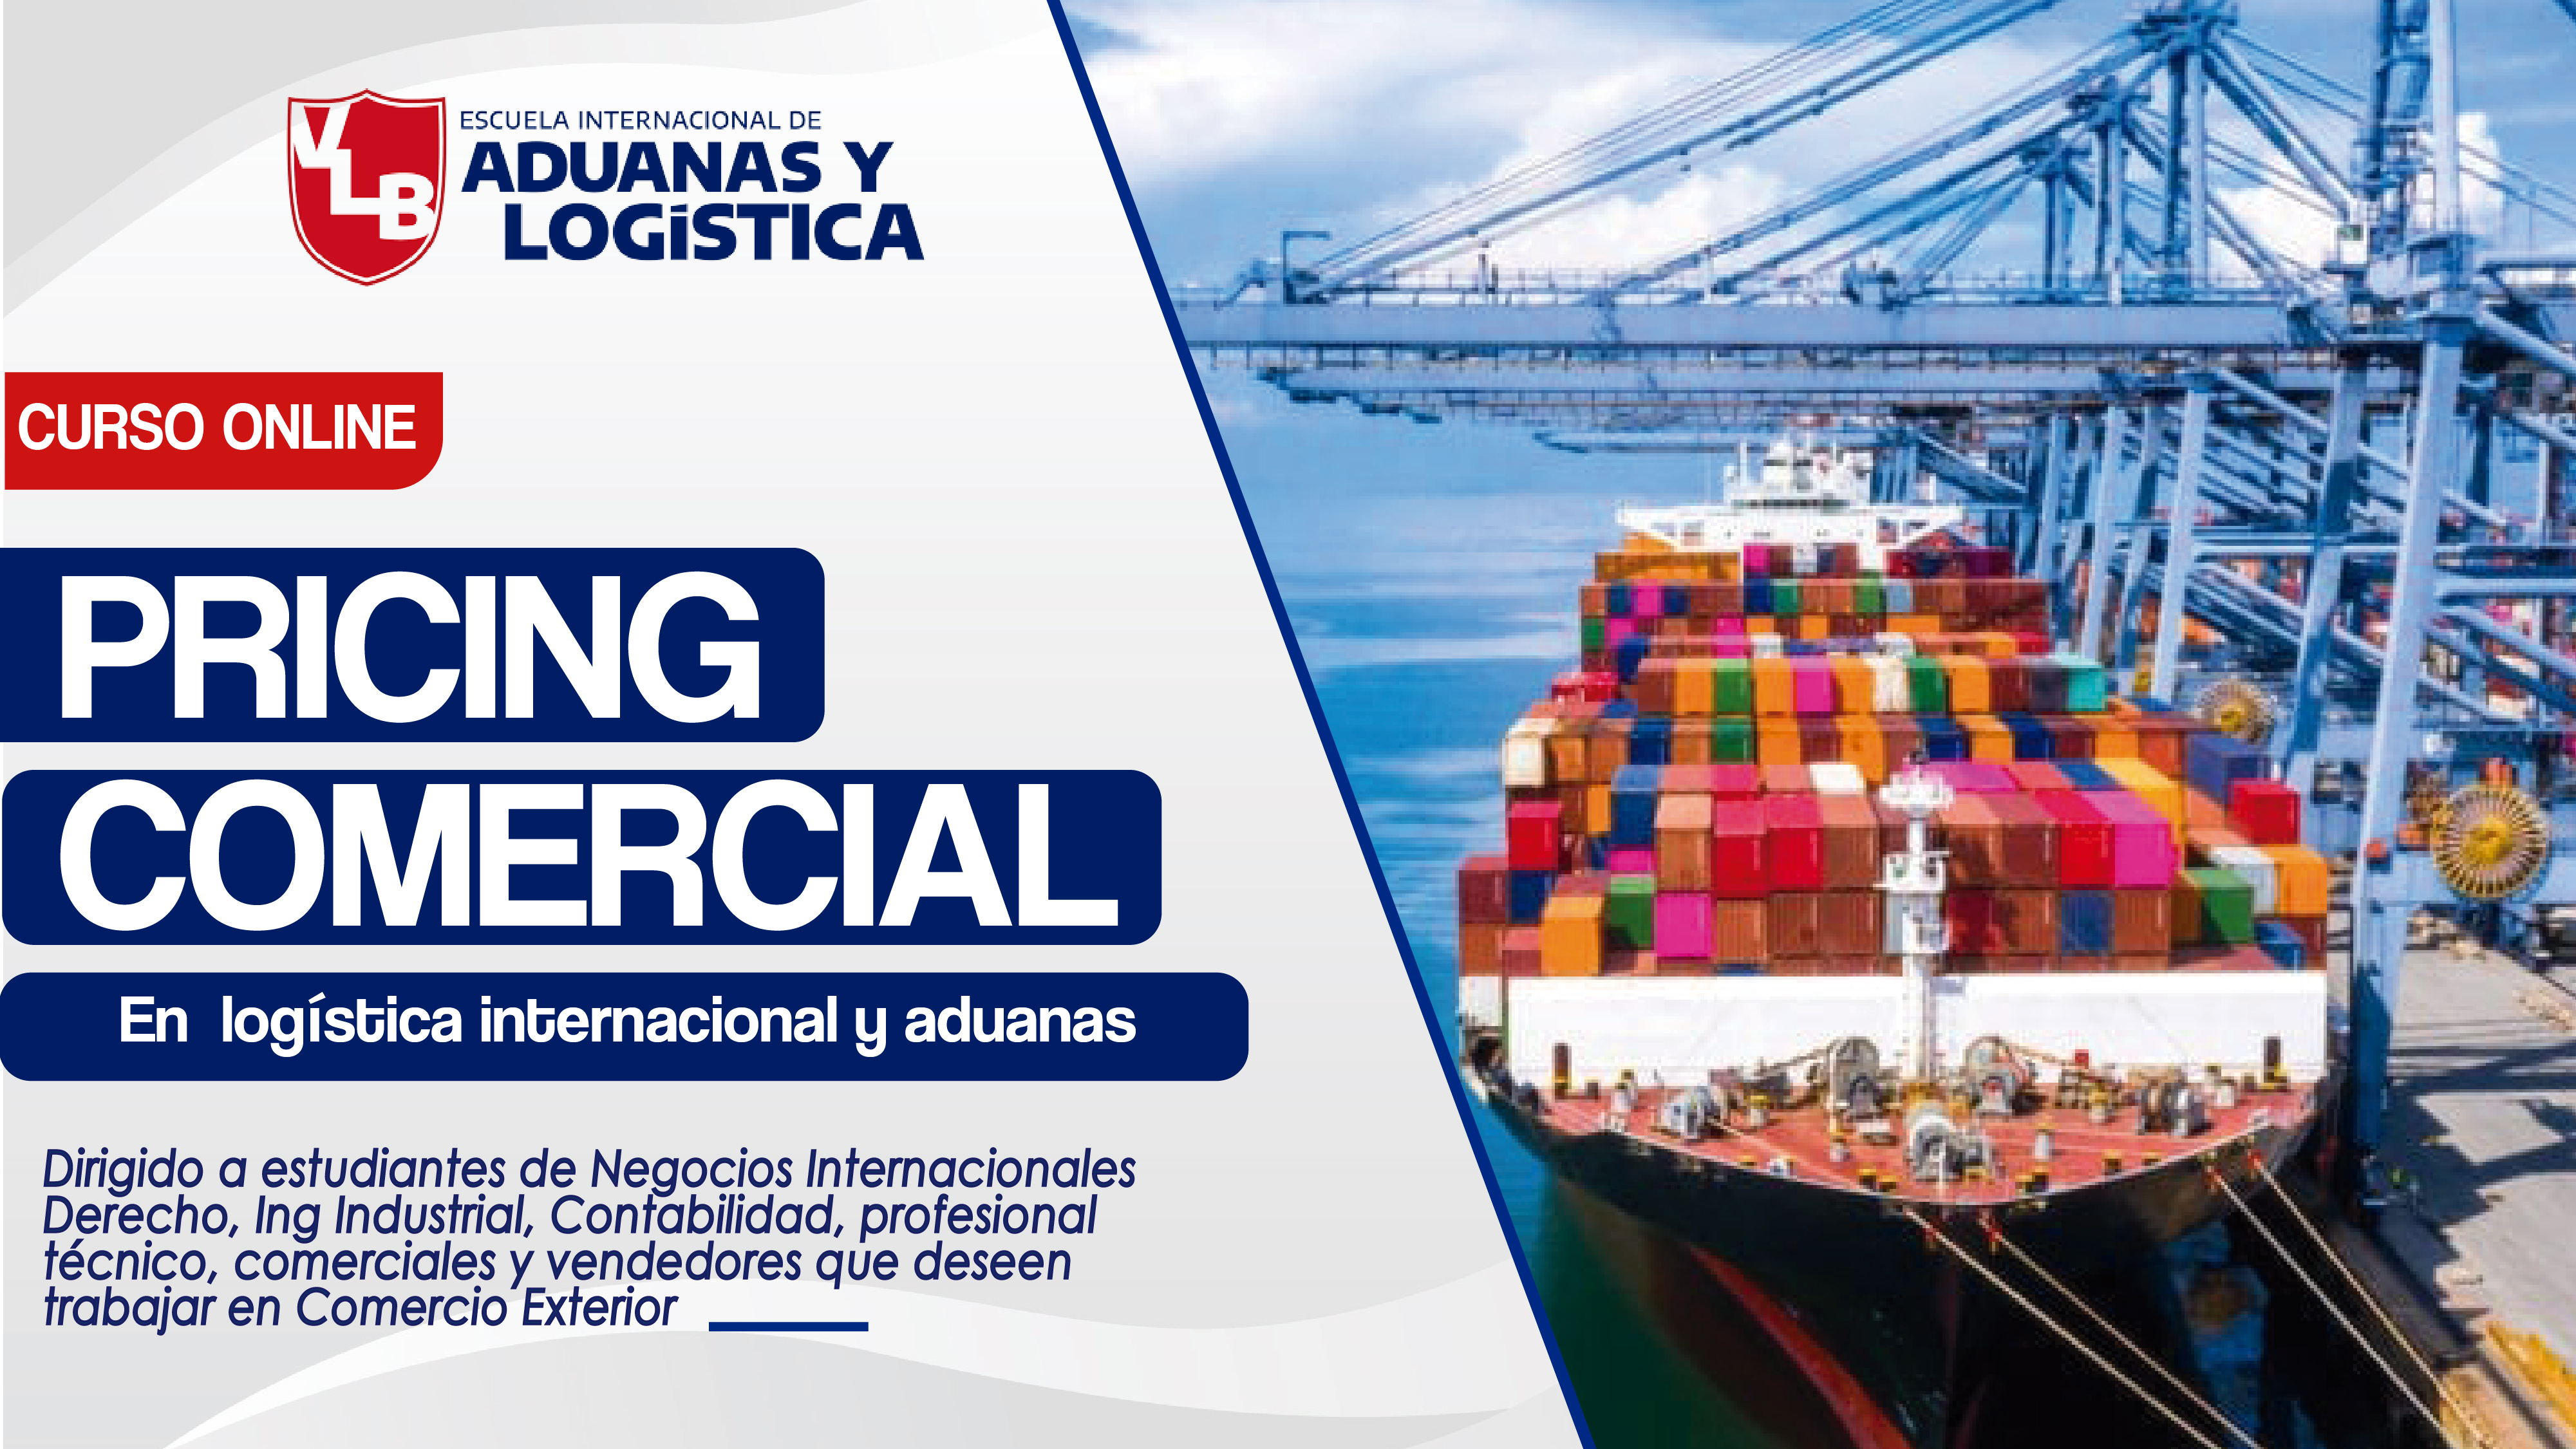 PRICING COMERCIAL 01-10-2022